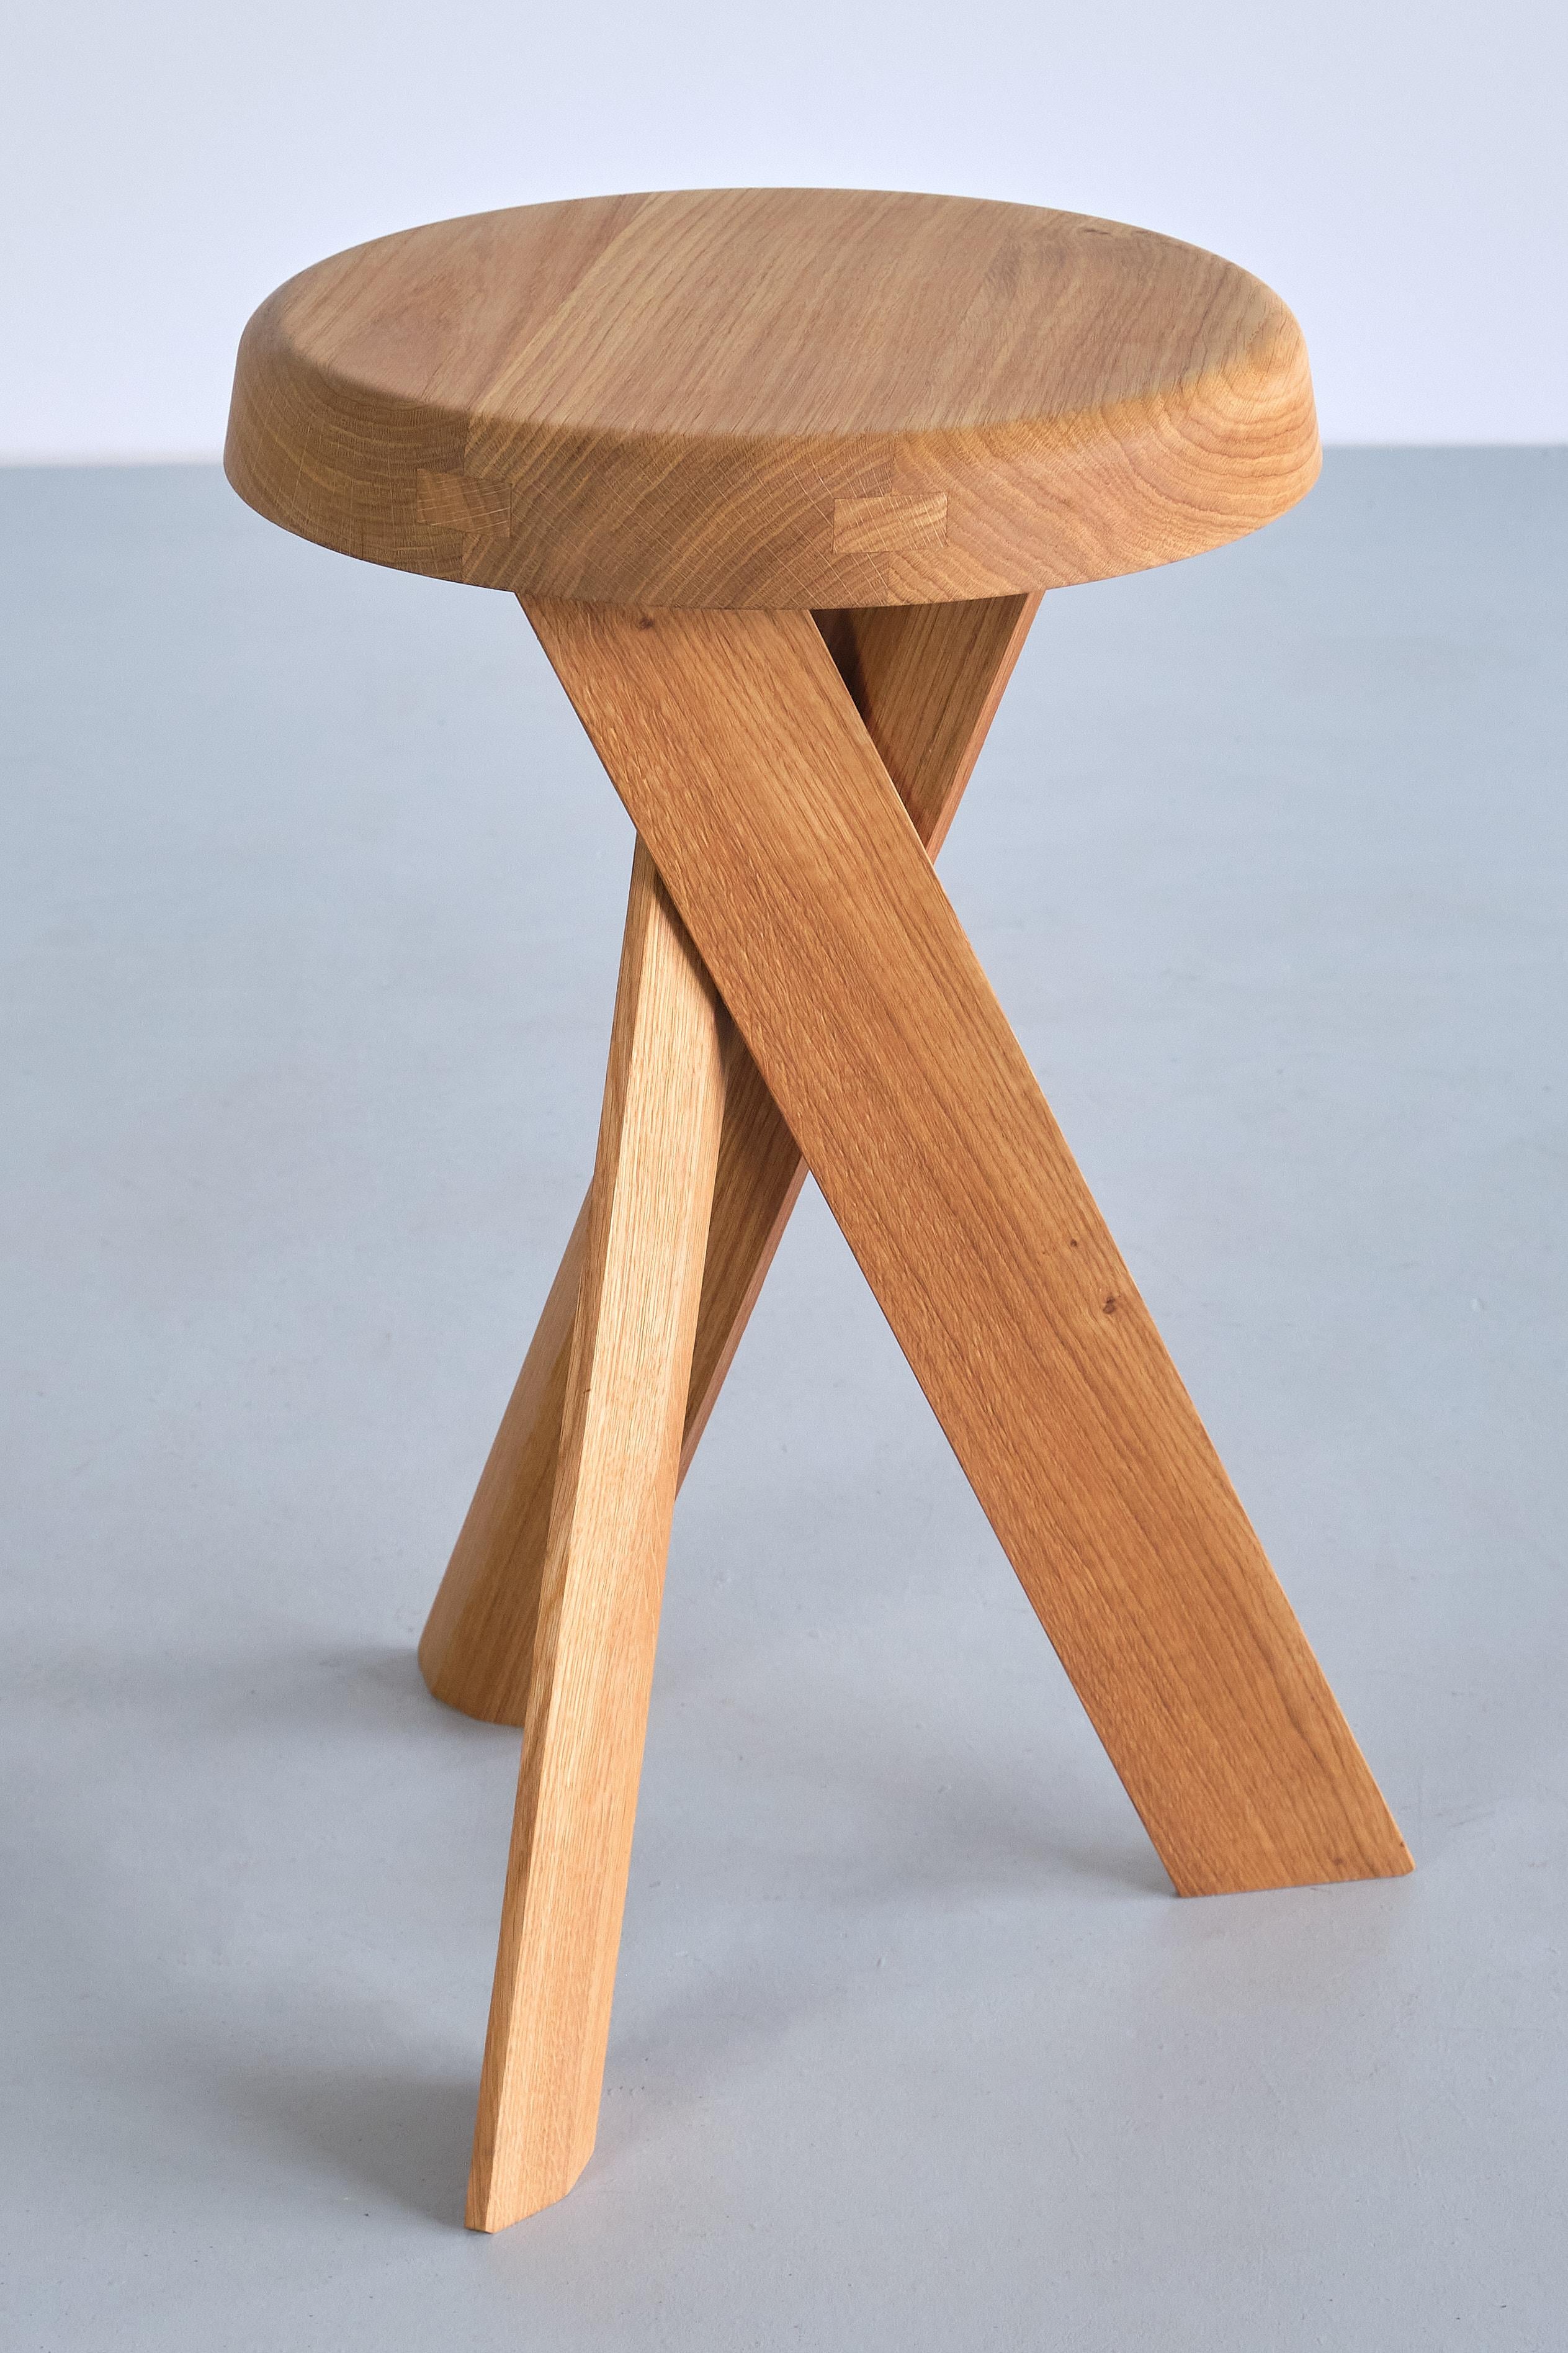 Pierre Chapo S31B Stool in Solid Oak Wood, Chapo Creation, France In New Condition For Sale In The Hague, NL